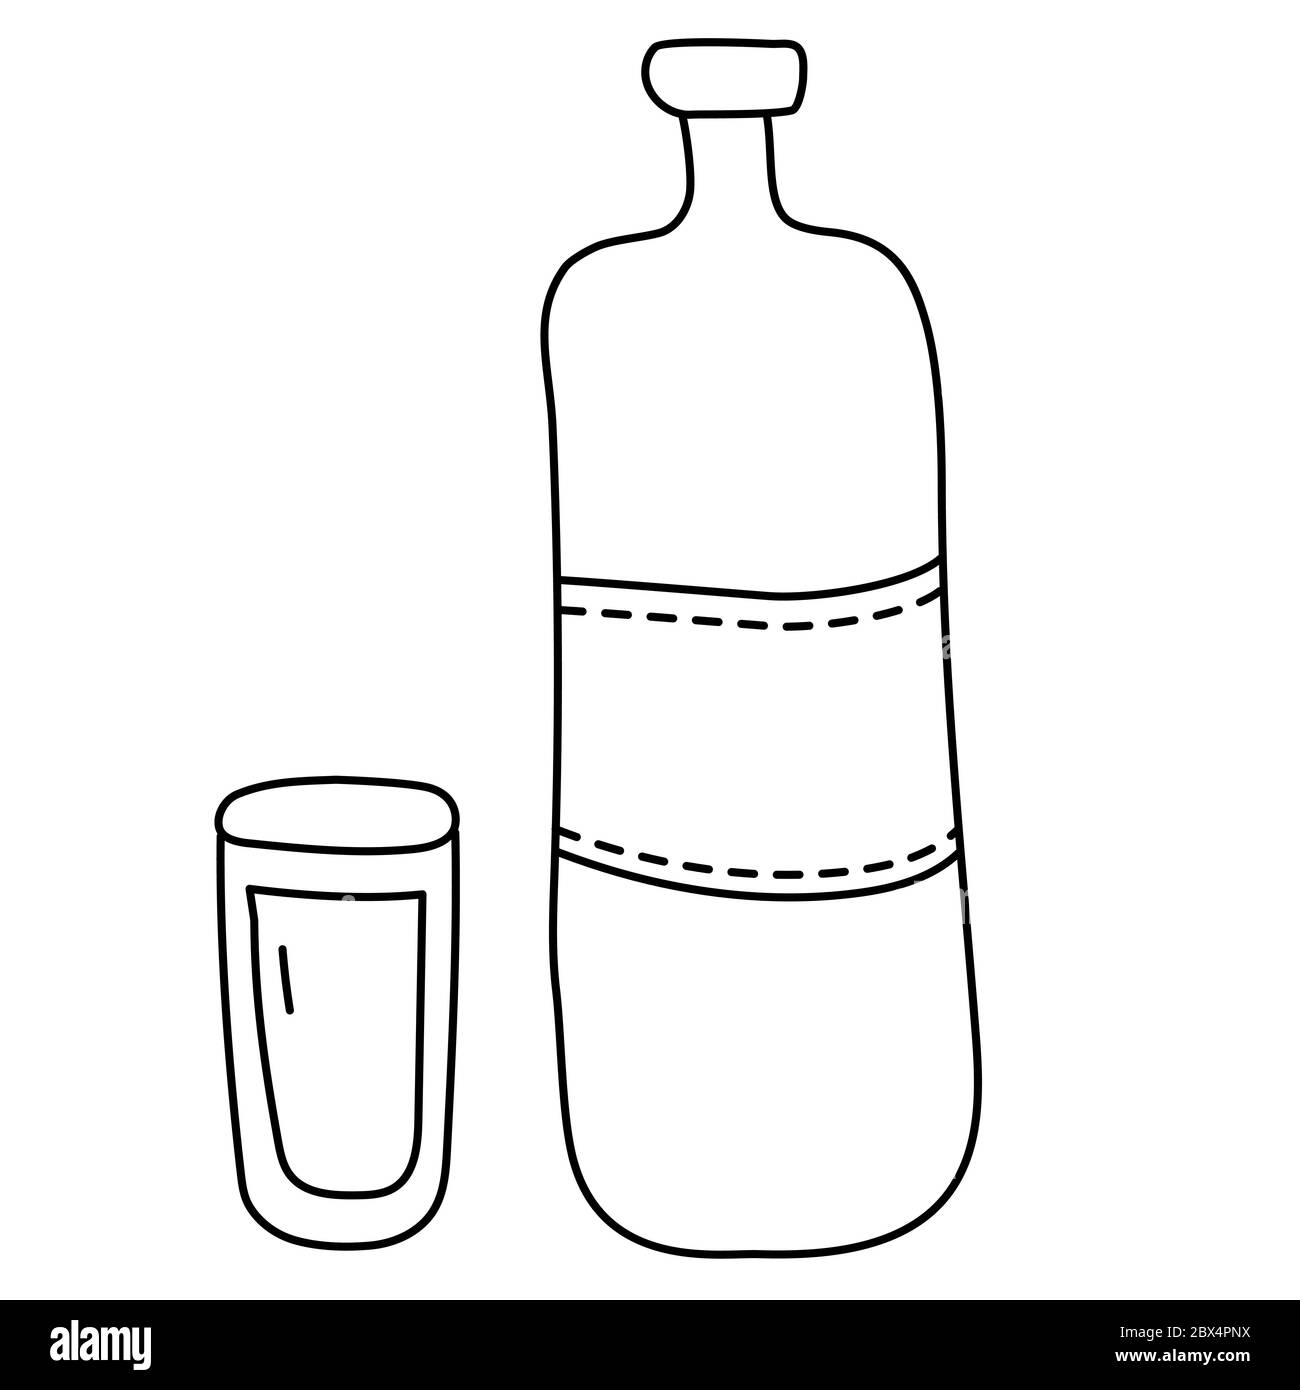 Bottle and glass. Black line outline drawing. Symbols and Icons Stock Vector